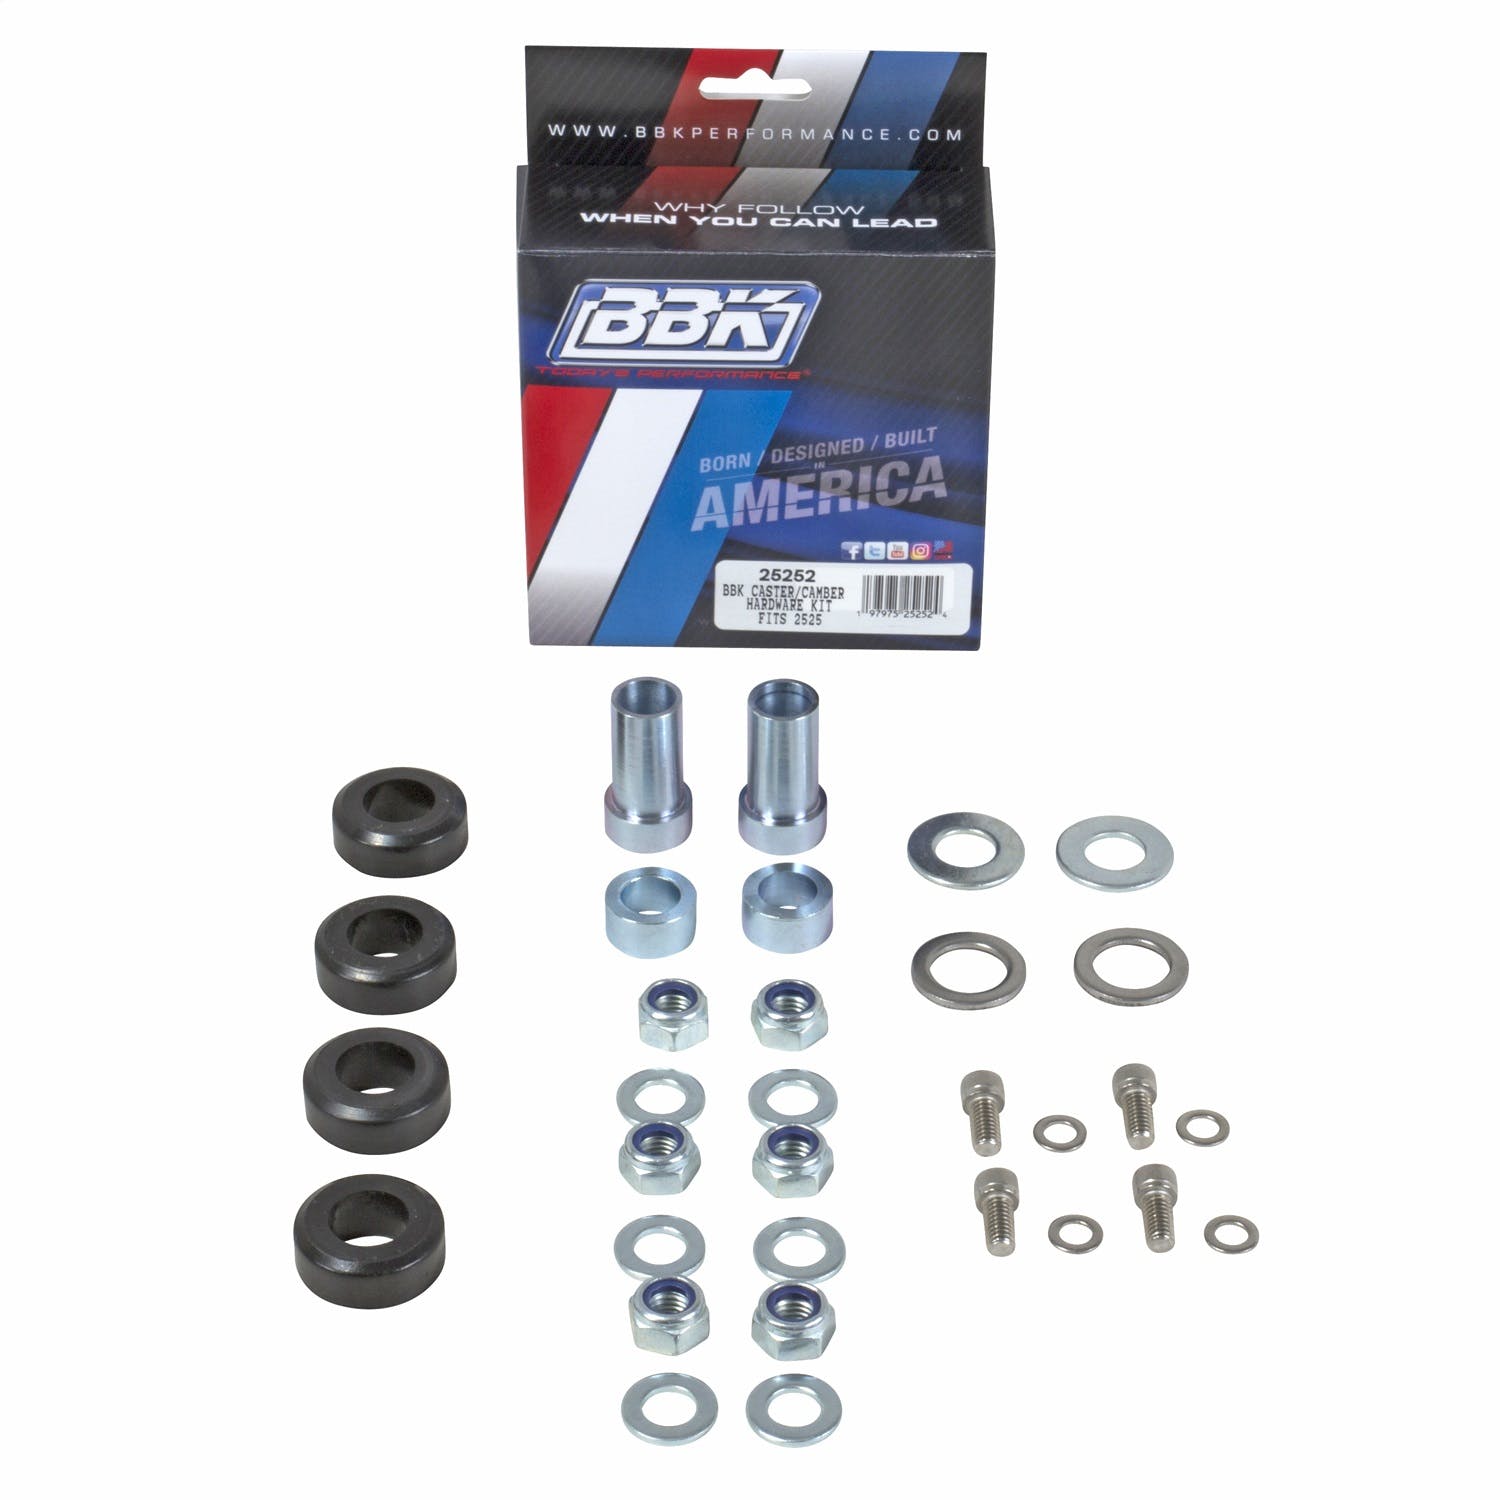 BBK Performance Parts 25252 Alignment Caster/Camber Hardware Kit